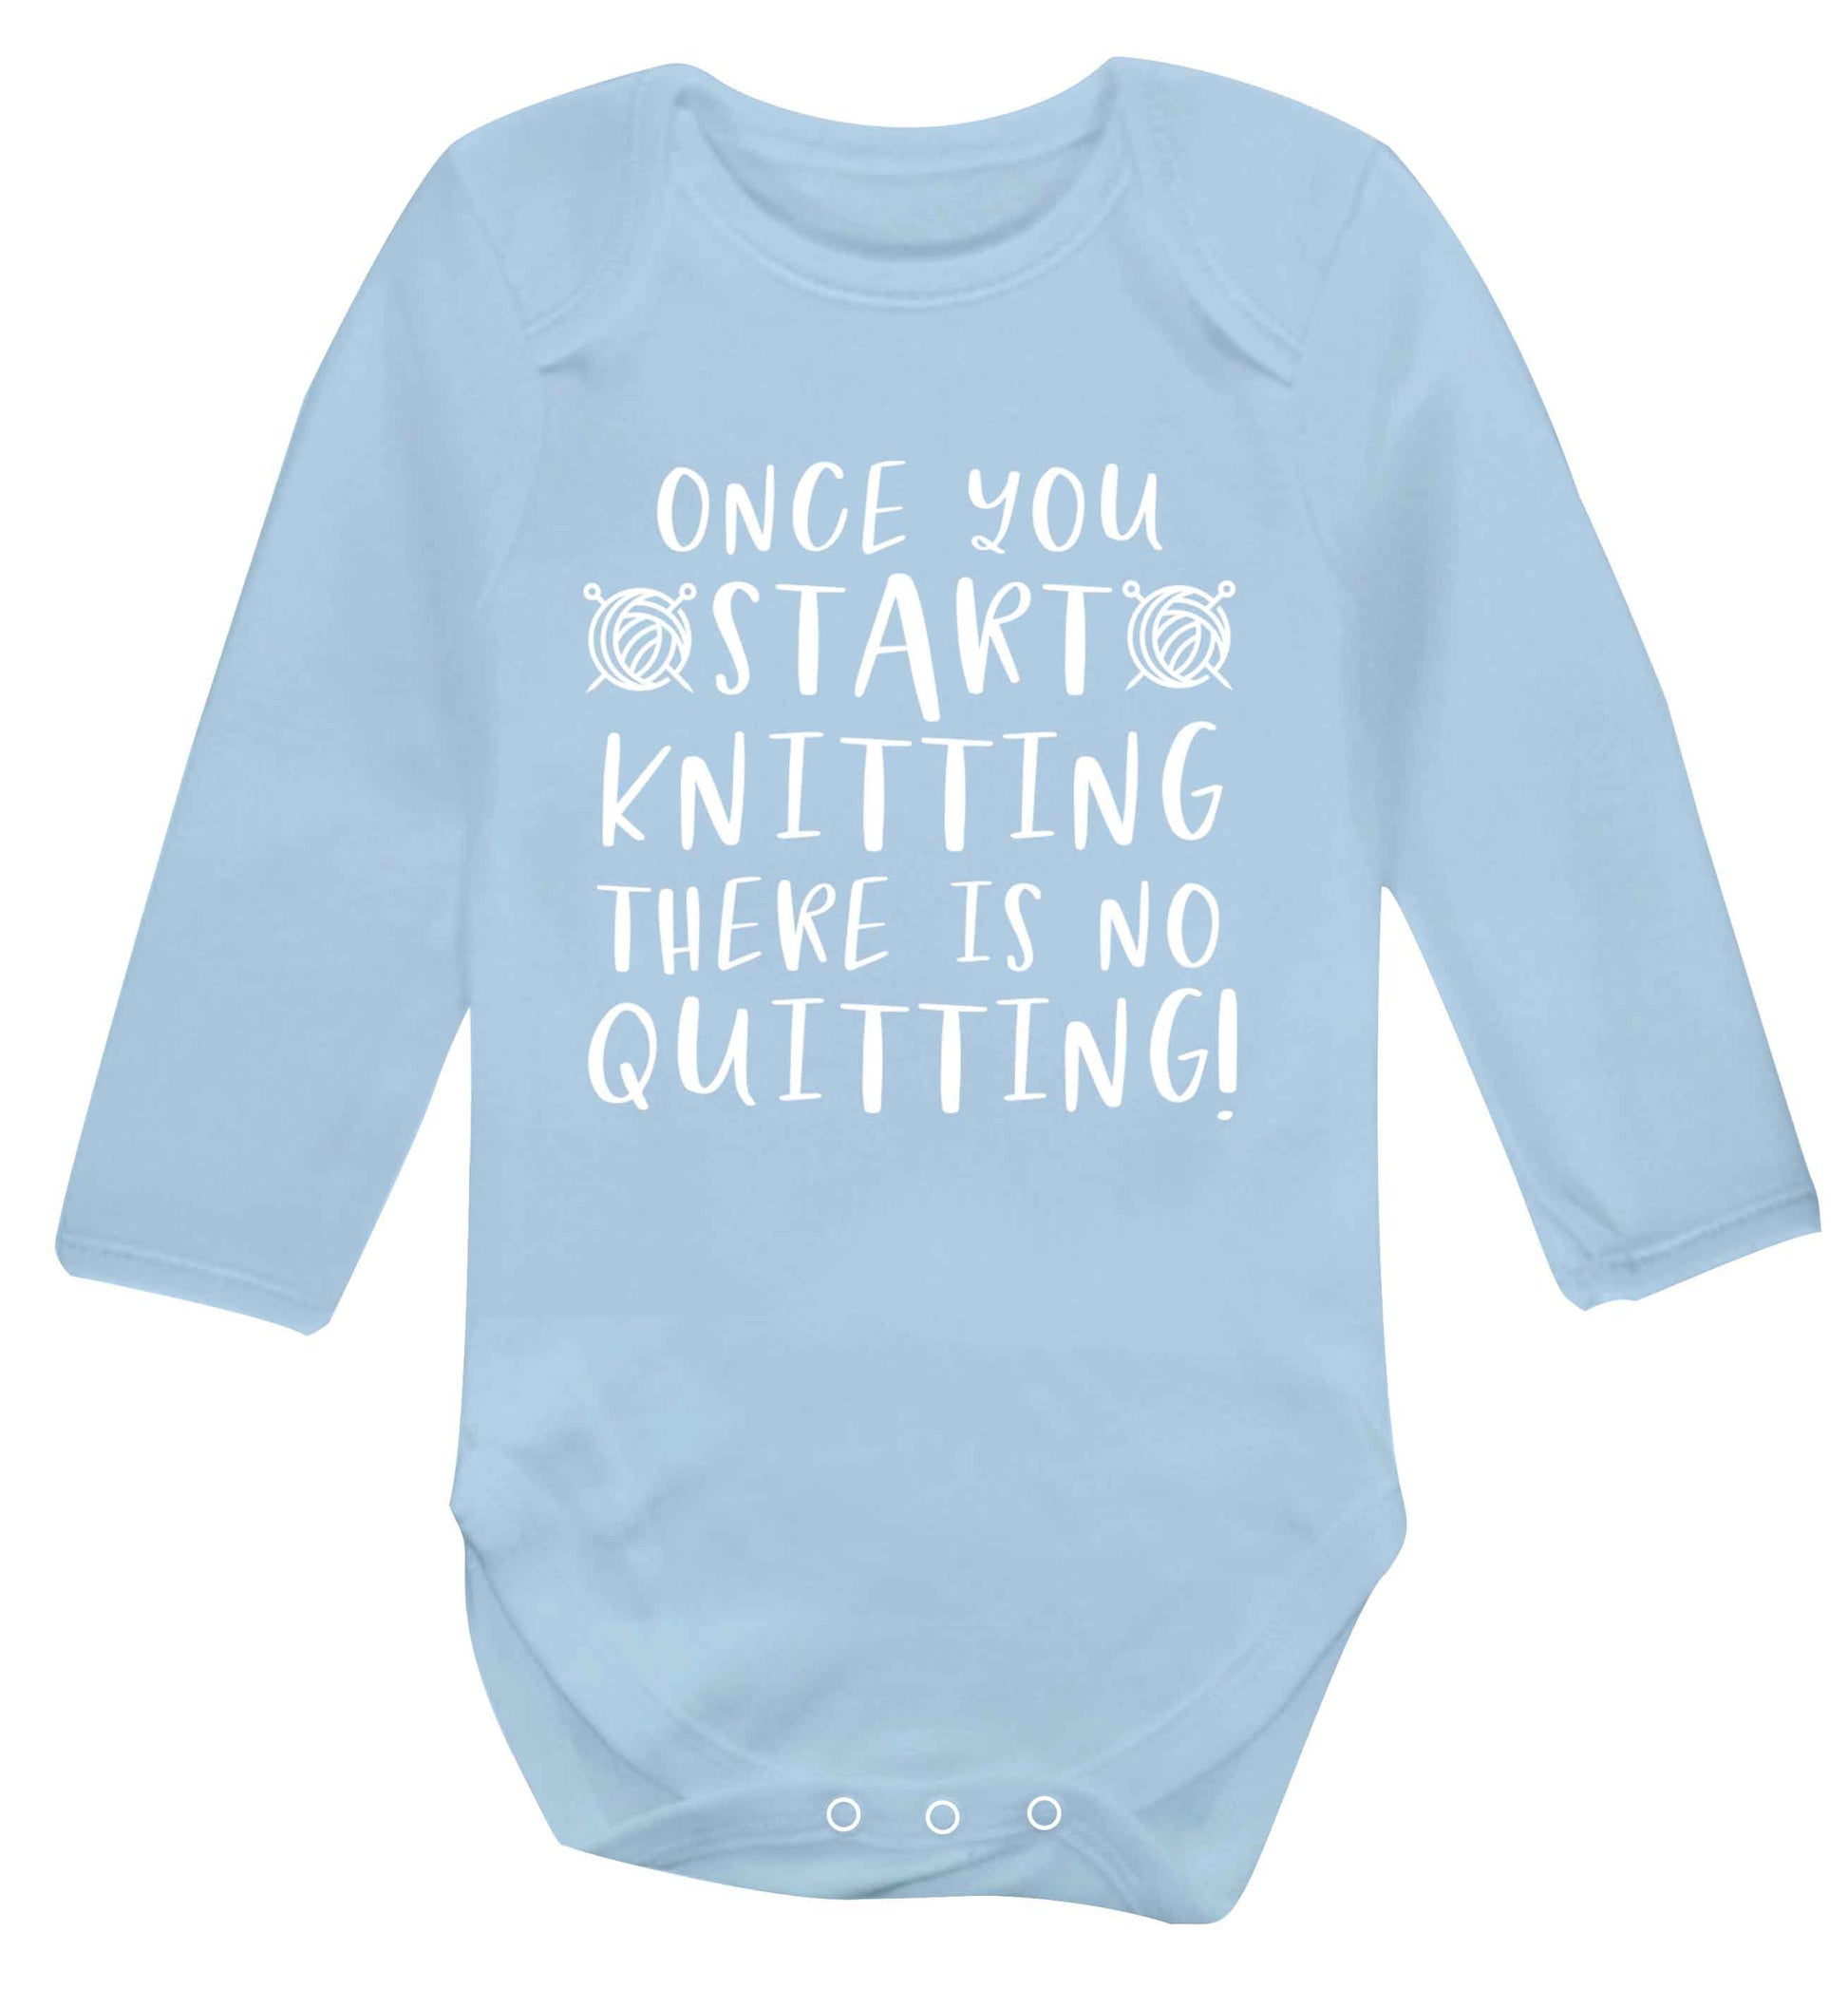 Once you start knitting there is no quitting! Baby Vest long sleeved pale blue 6-12 months